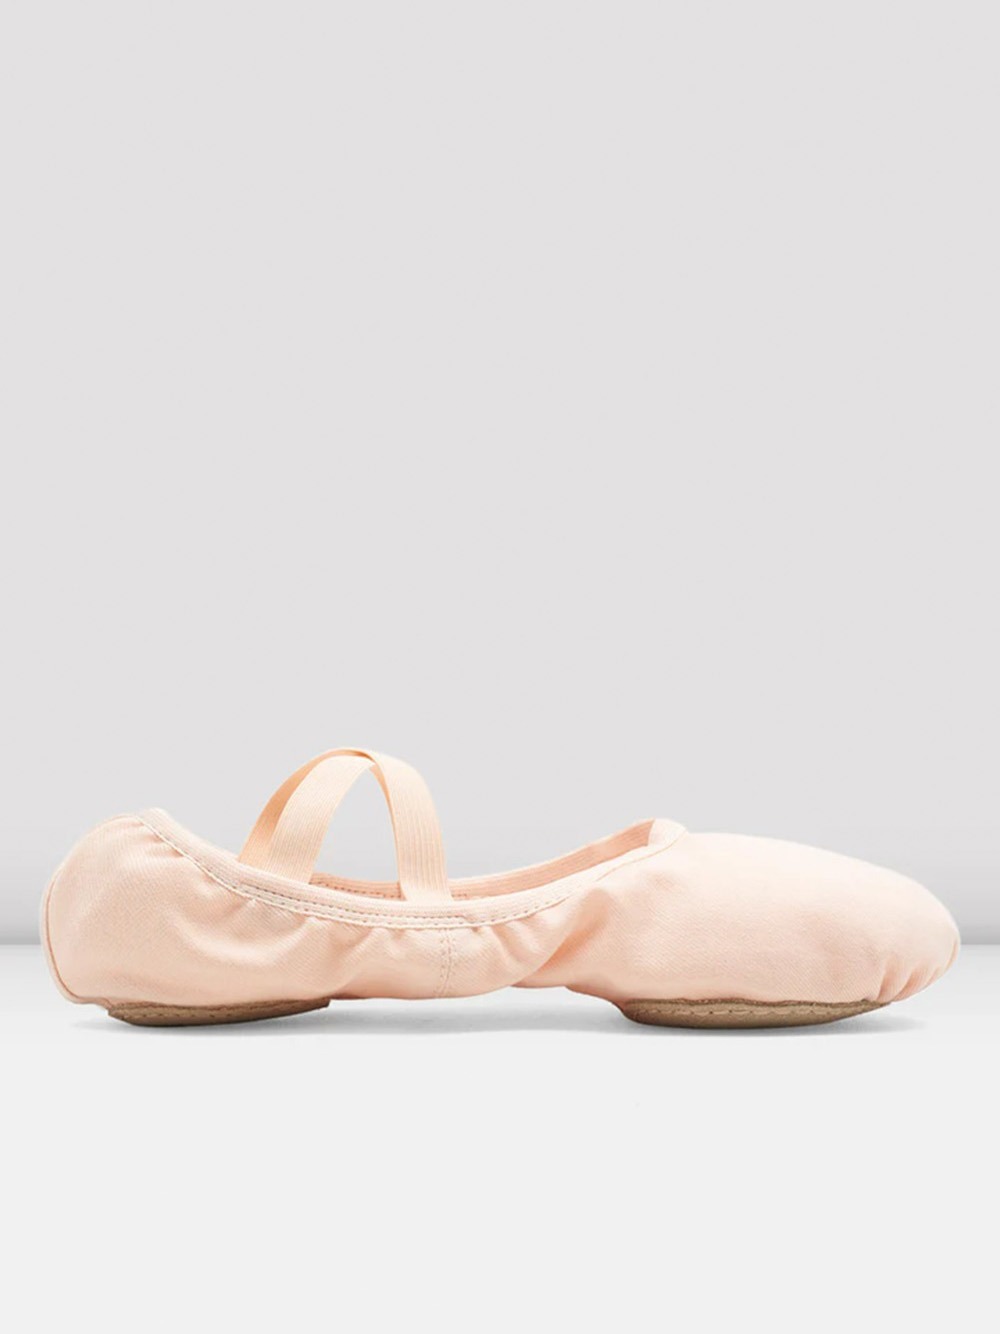 PERFORMA STRETCH CANVAS BALLET SHOES - THEATRICAL PINK